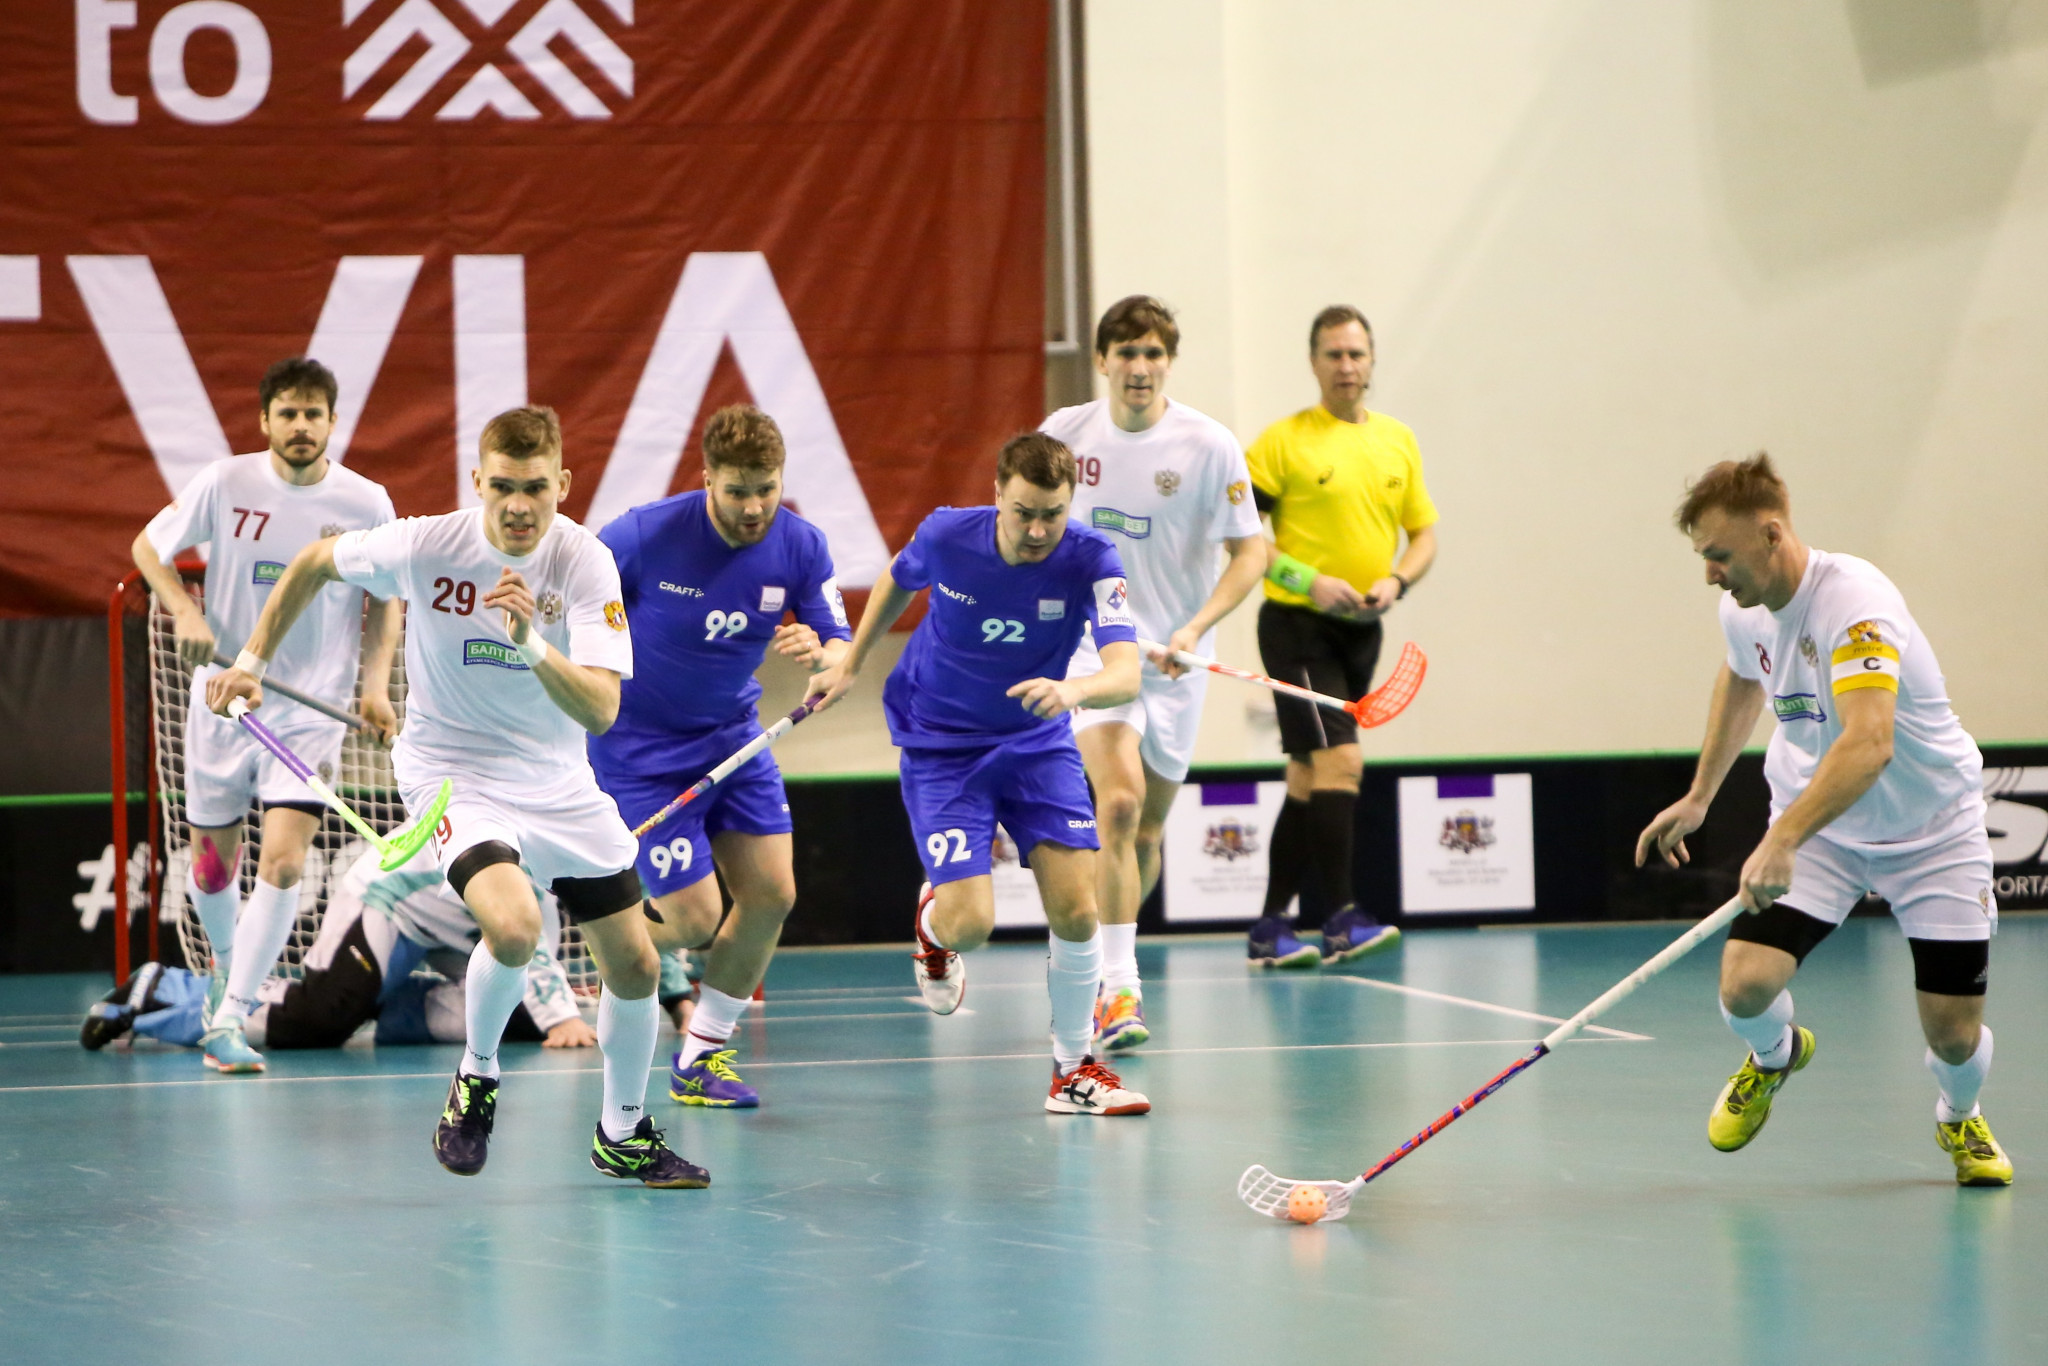 Russia edged Iceland 7-5 in the first match of the day ©IFF/Flickr